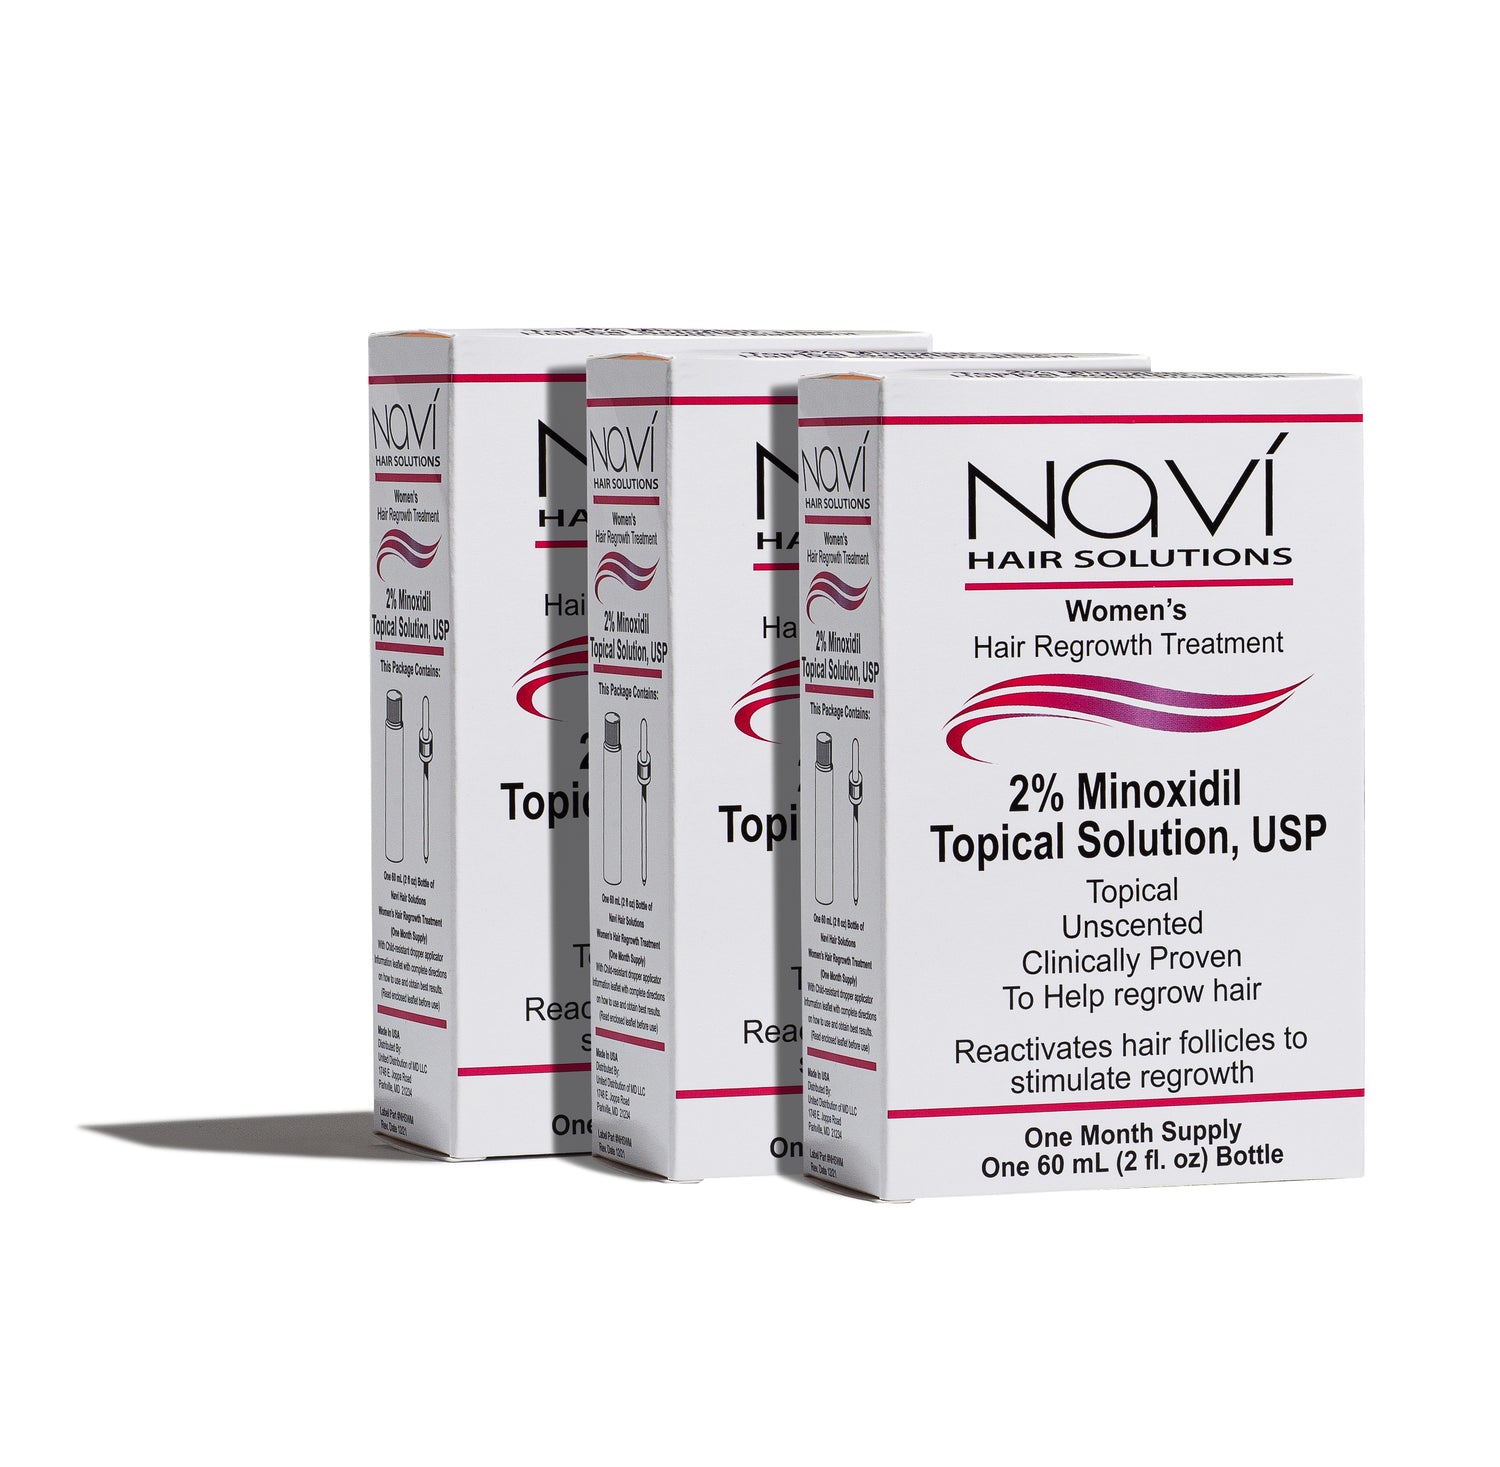 Women's 2% FDA Approved Minoxidil Topical clinically proven to regrow hair